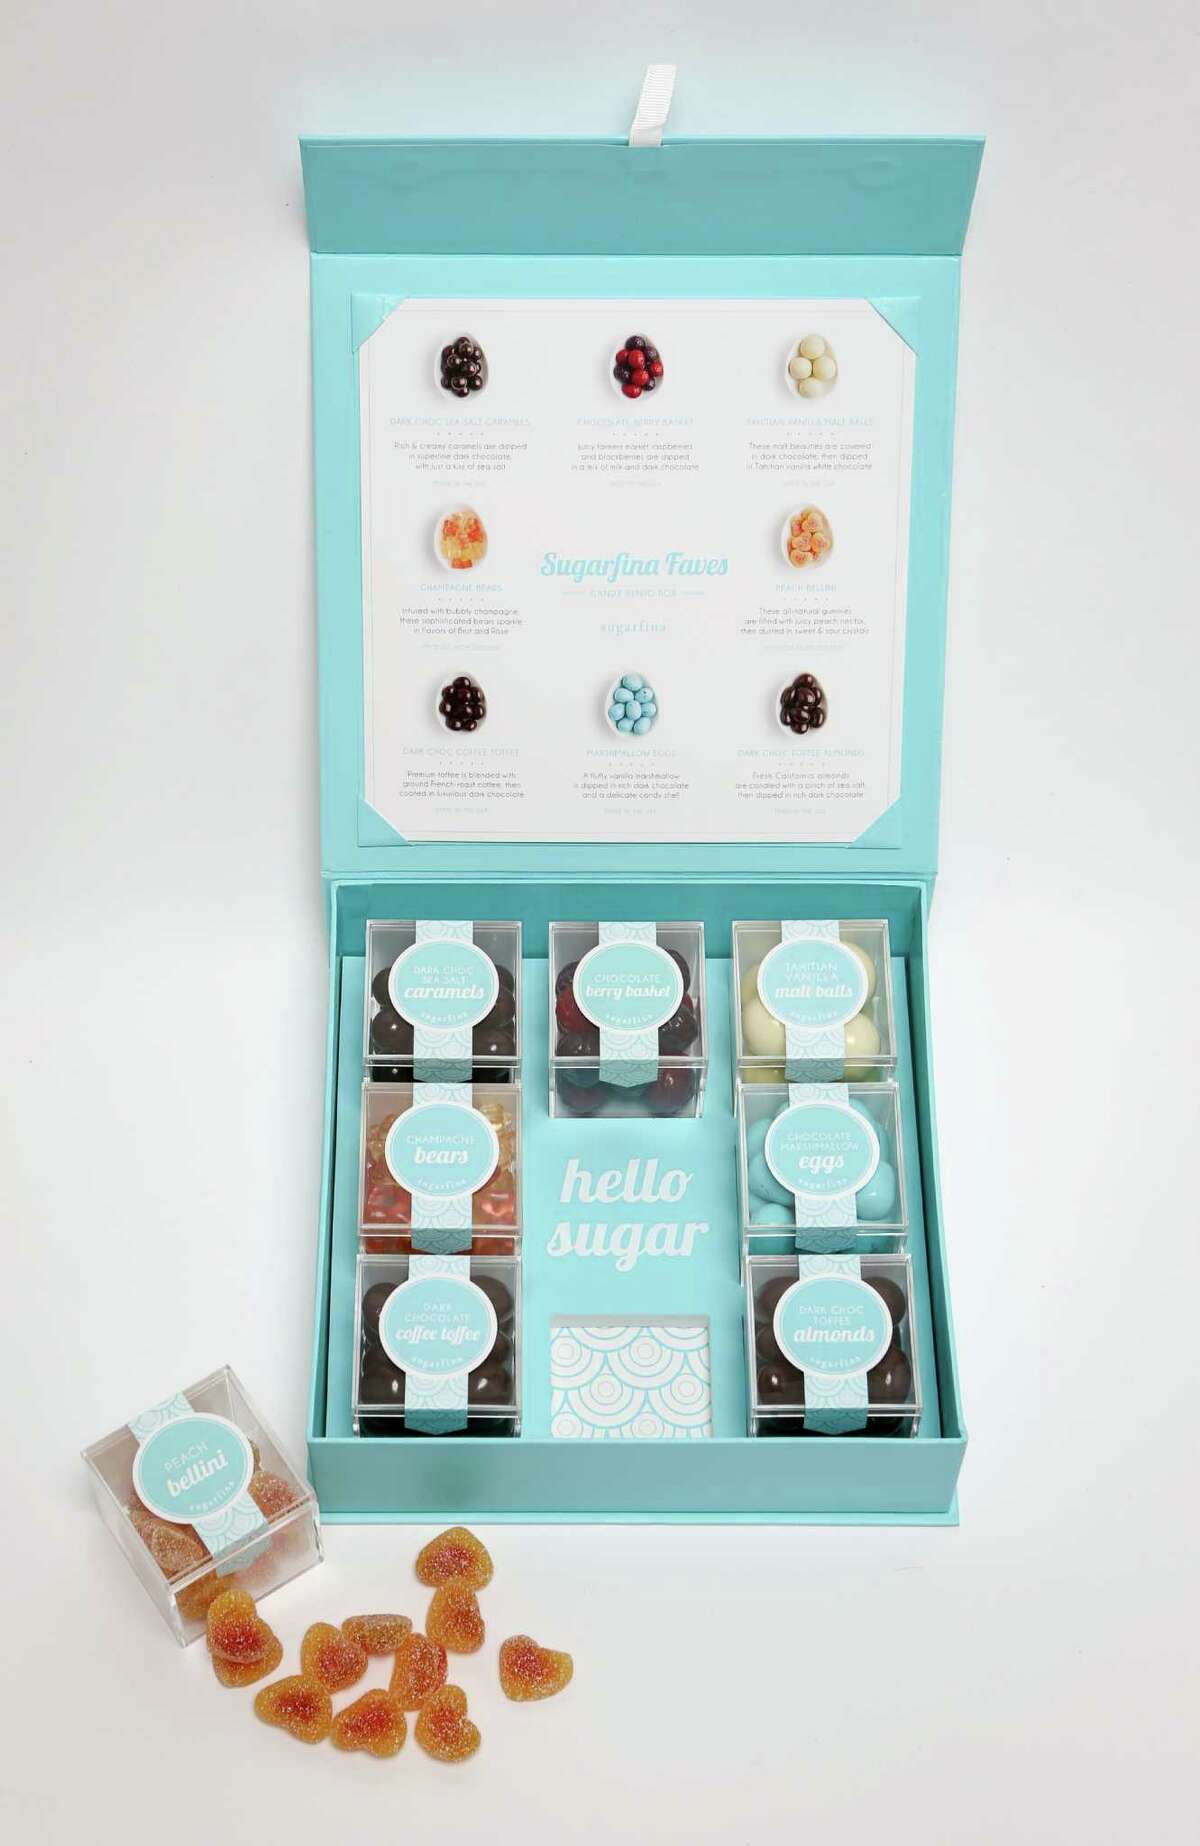 Eight-piece Bento Box, $60, available at Sugarfina’s Union Square (272 Sutter St.) and Cow Hollow (1837 Union St.) locations. (855) 784-2734. www.sugarfina.com.